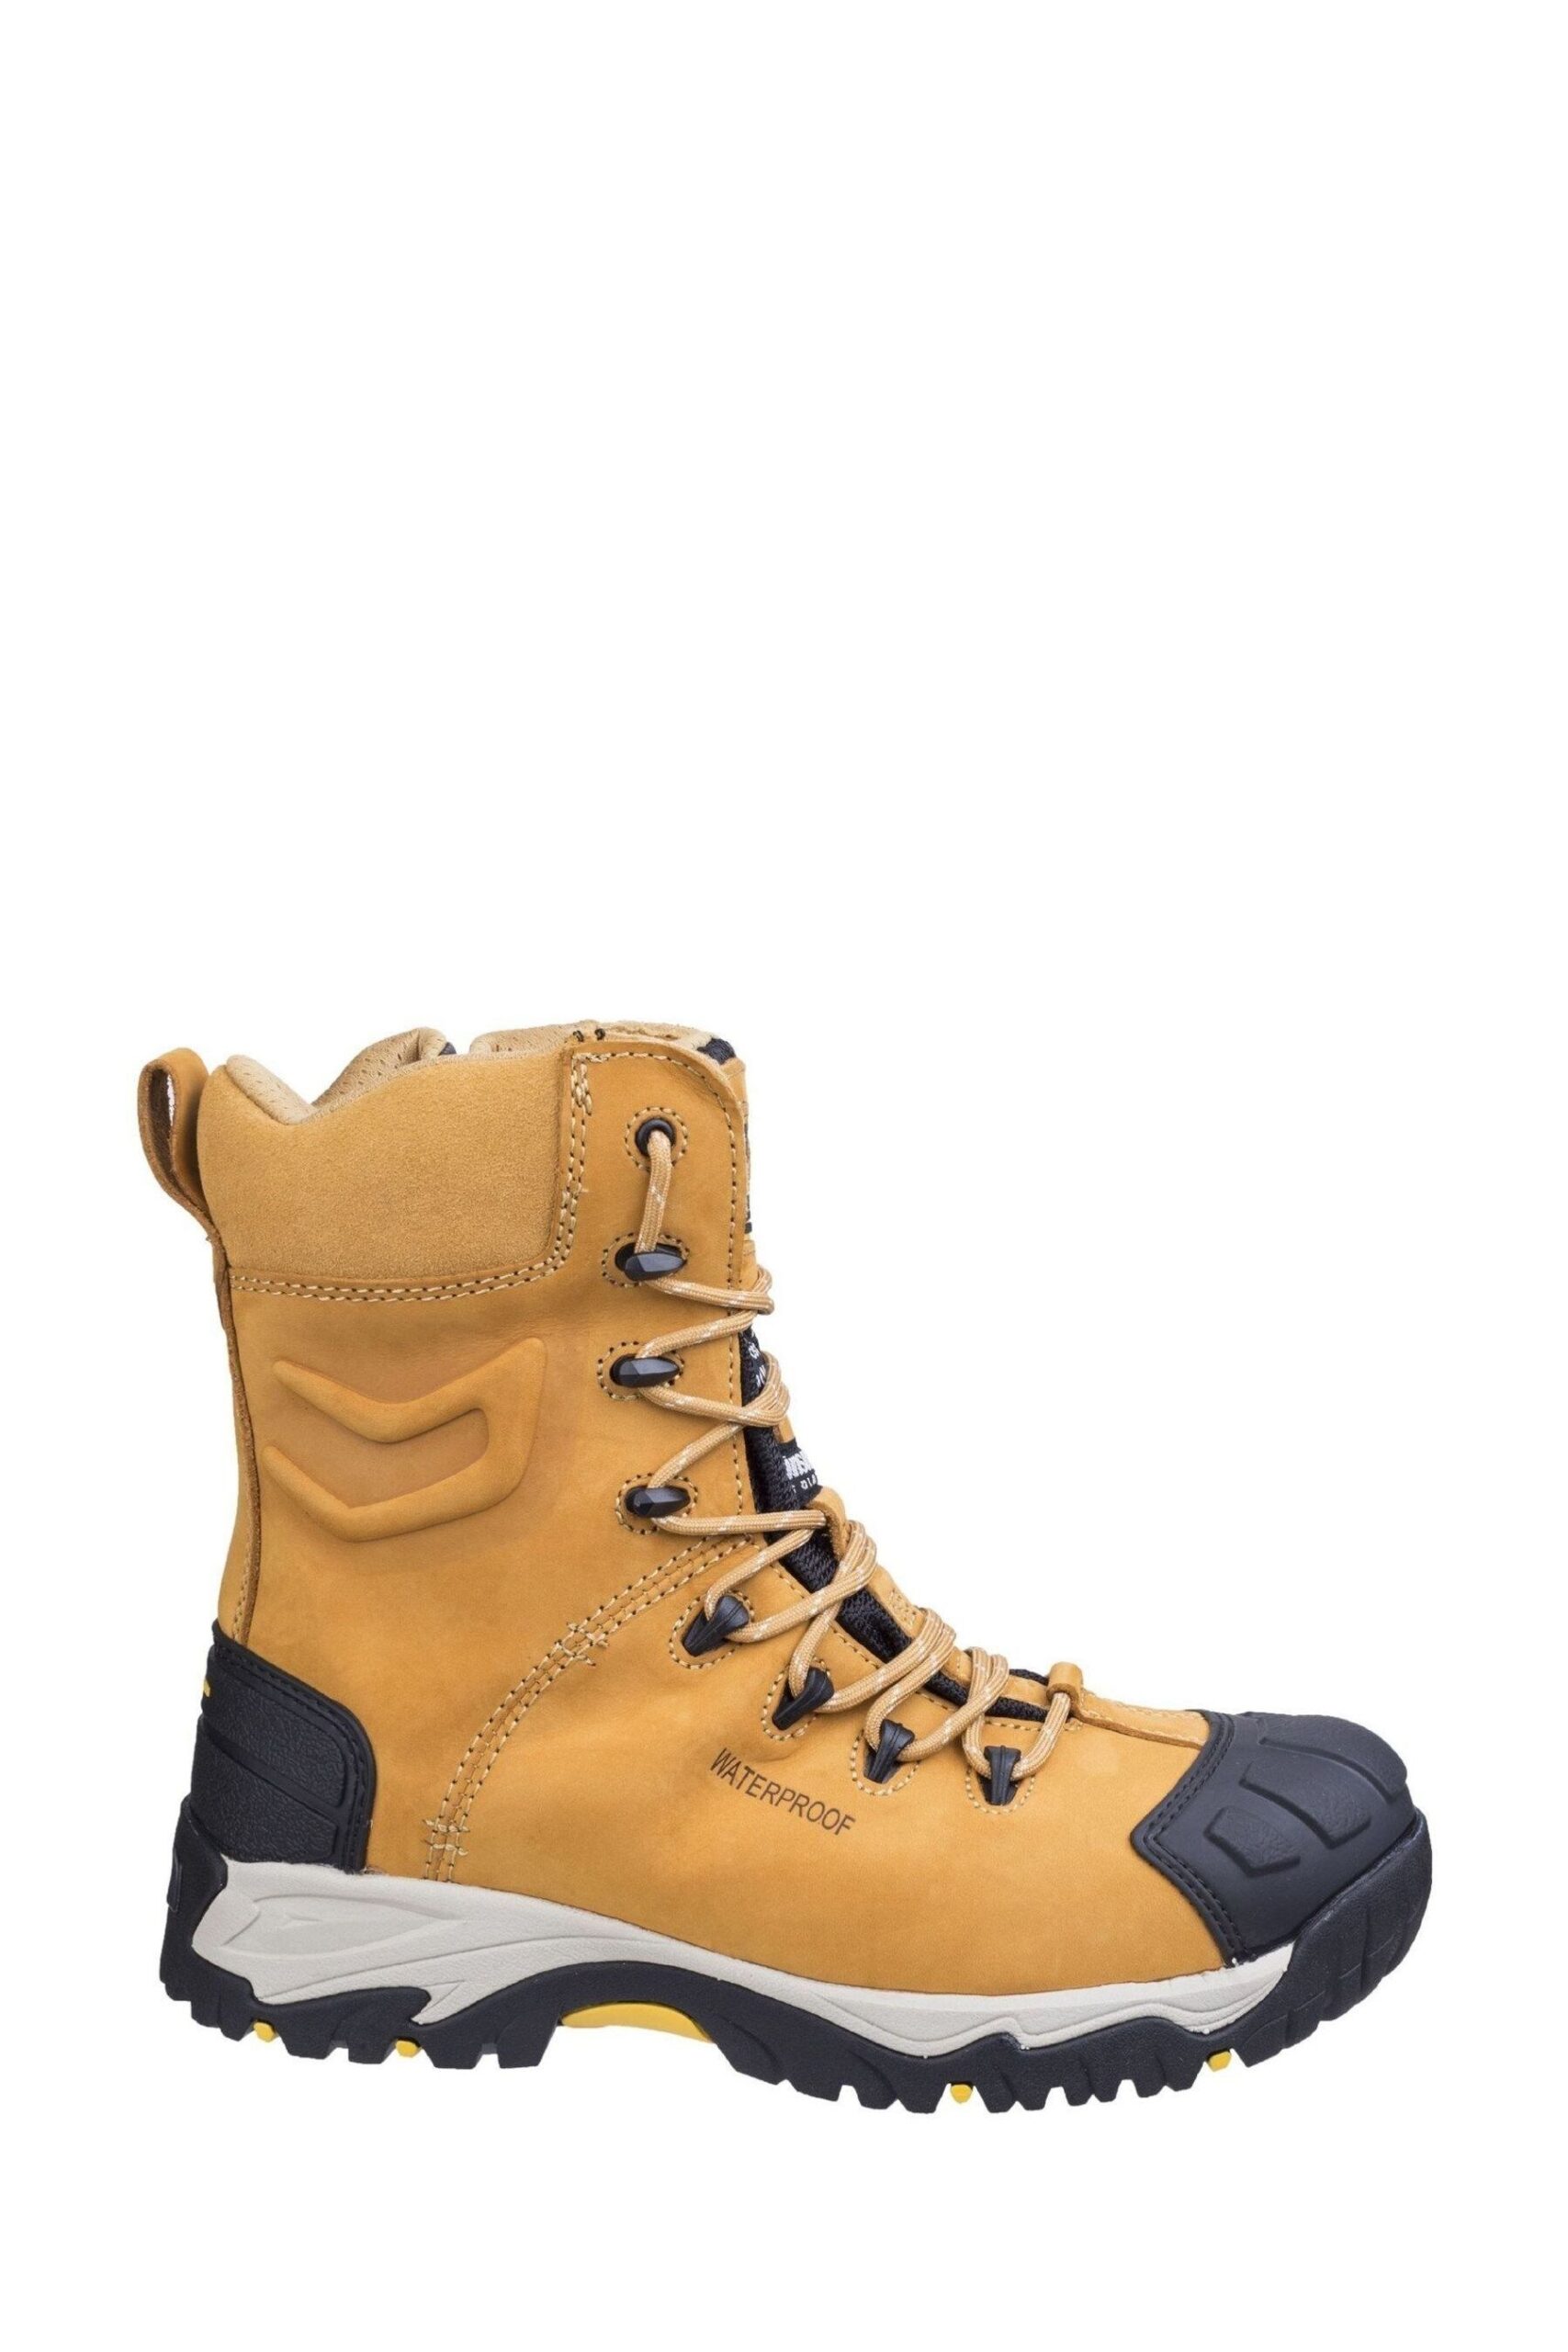 Thinsulate Boots For Excellent Feet
  Warmth And Functionality